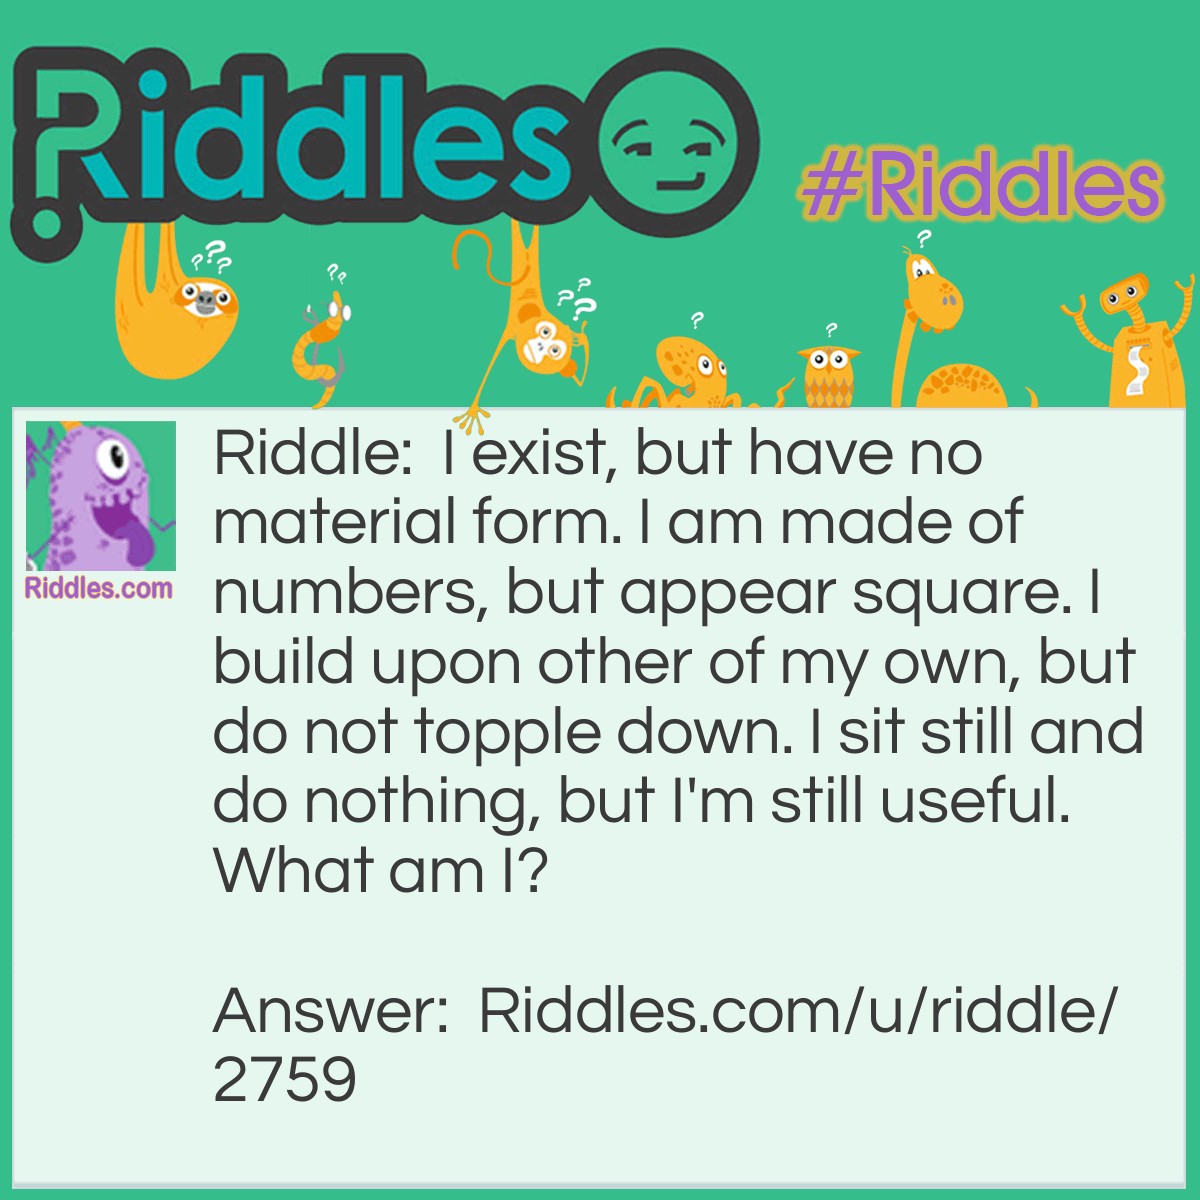 Riddle: I exist, but have no material form. I am made of numbers, but appear square. I build upon other of my own, but do not topple down. I sit still and do nothing, but I'm still useful. What am I? Answer: Minecraft Blocks.